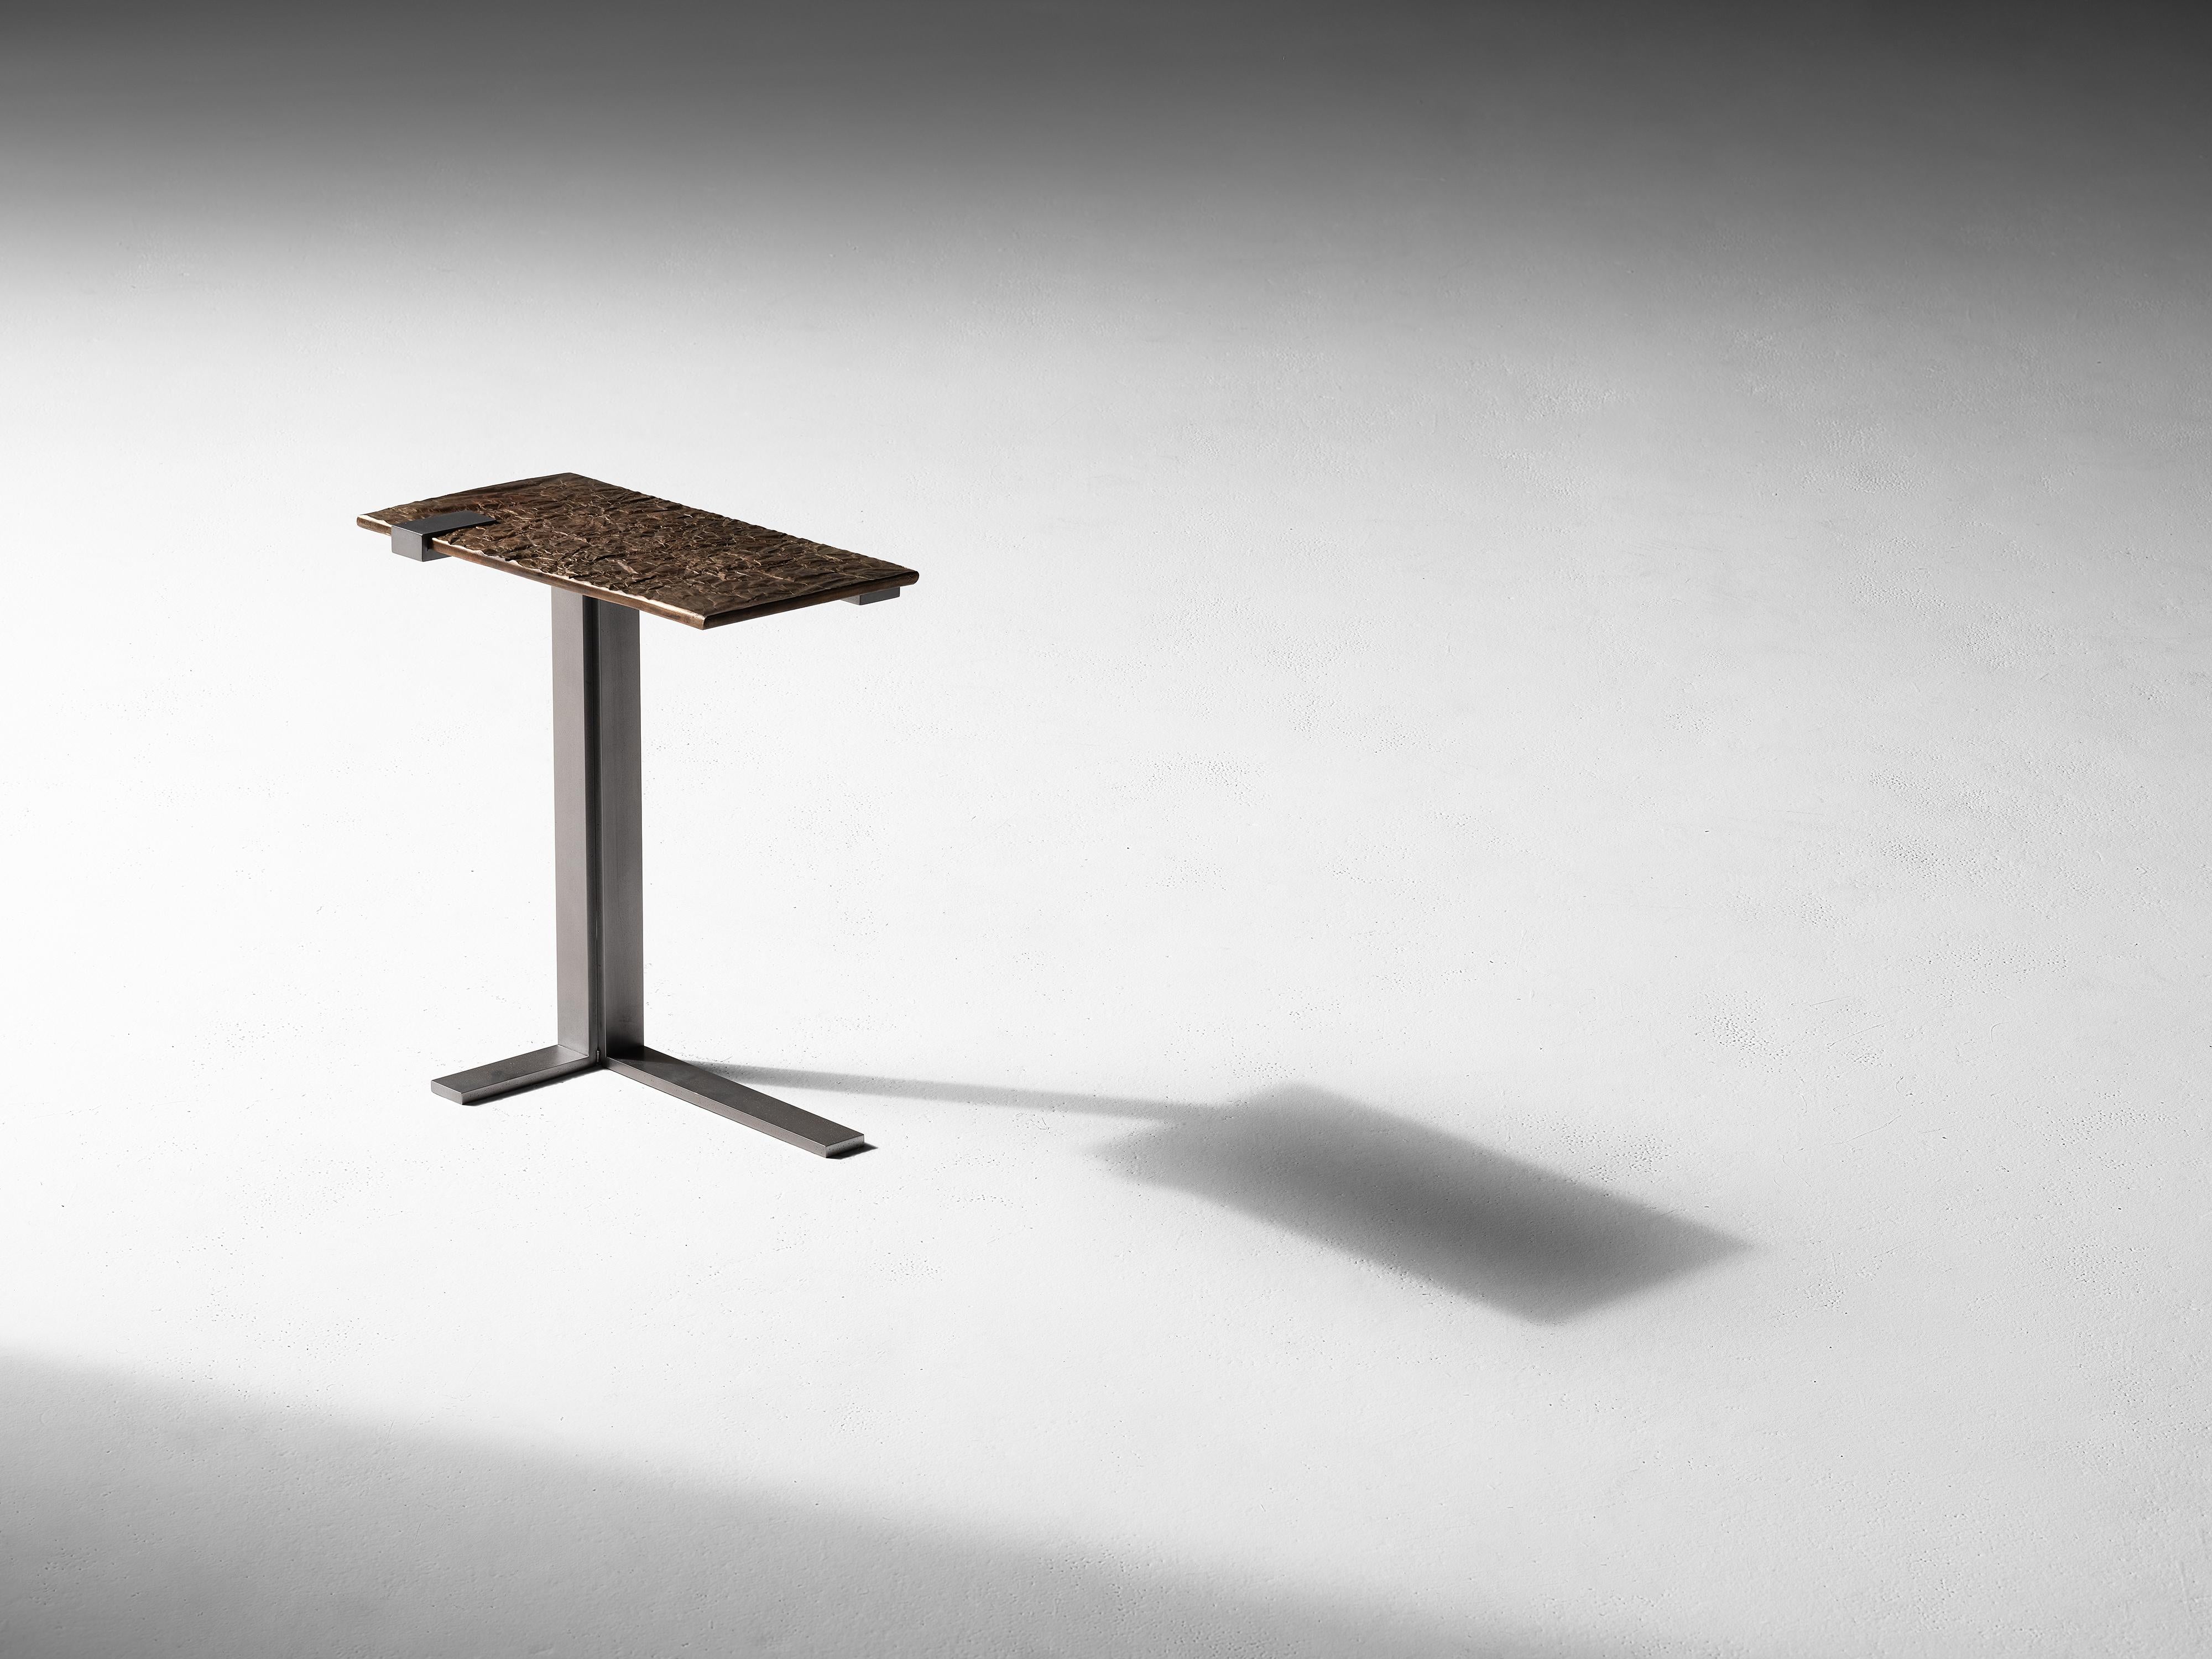 This geometric, cantilevered side table, an industrial arrangement of right angles in bronze and cold blackened steel, is adorned by a playful top reminiscent of a section of parched earth.

Master metalsmith Douglas Fanning's extra long console